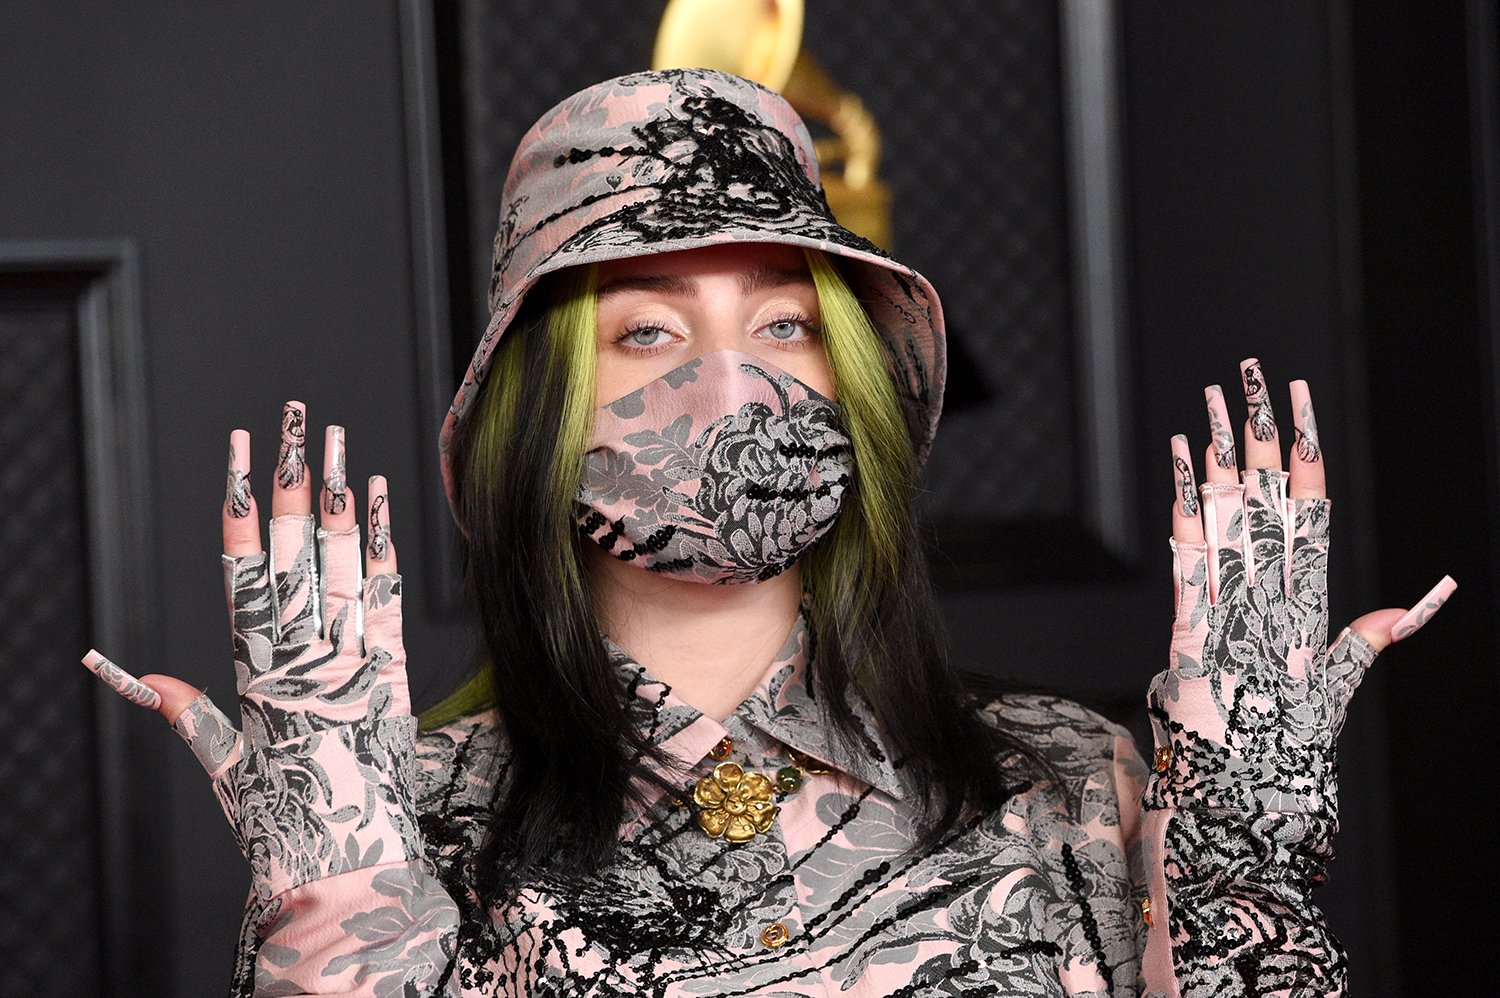 How Many Tattoos Does Billie Eilish Have?